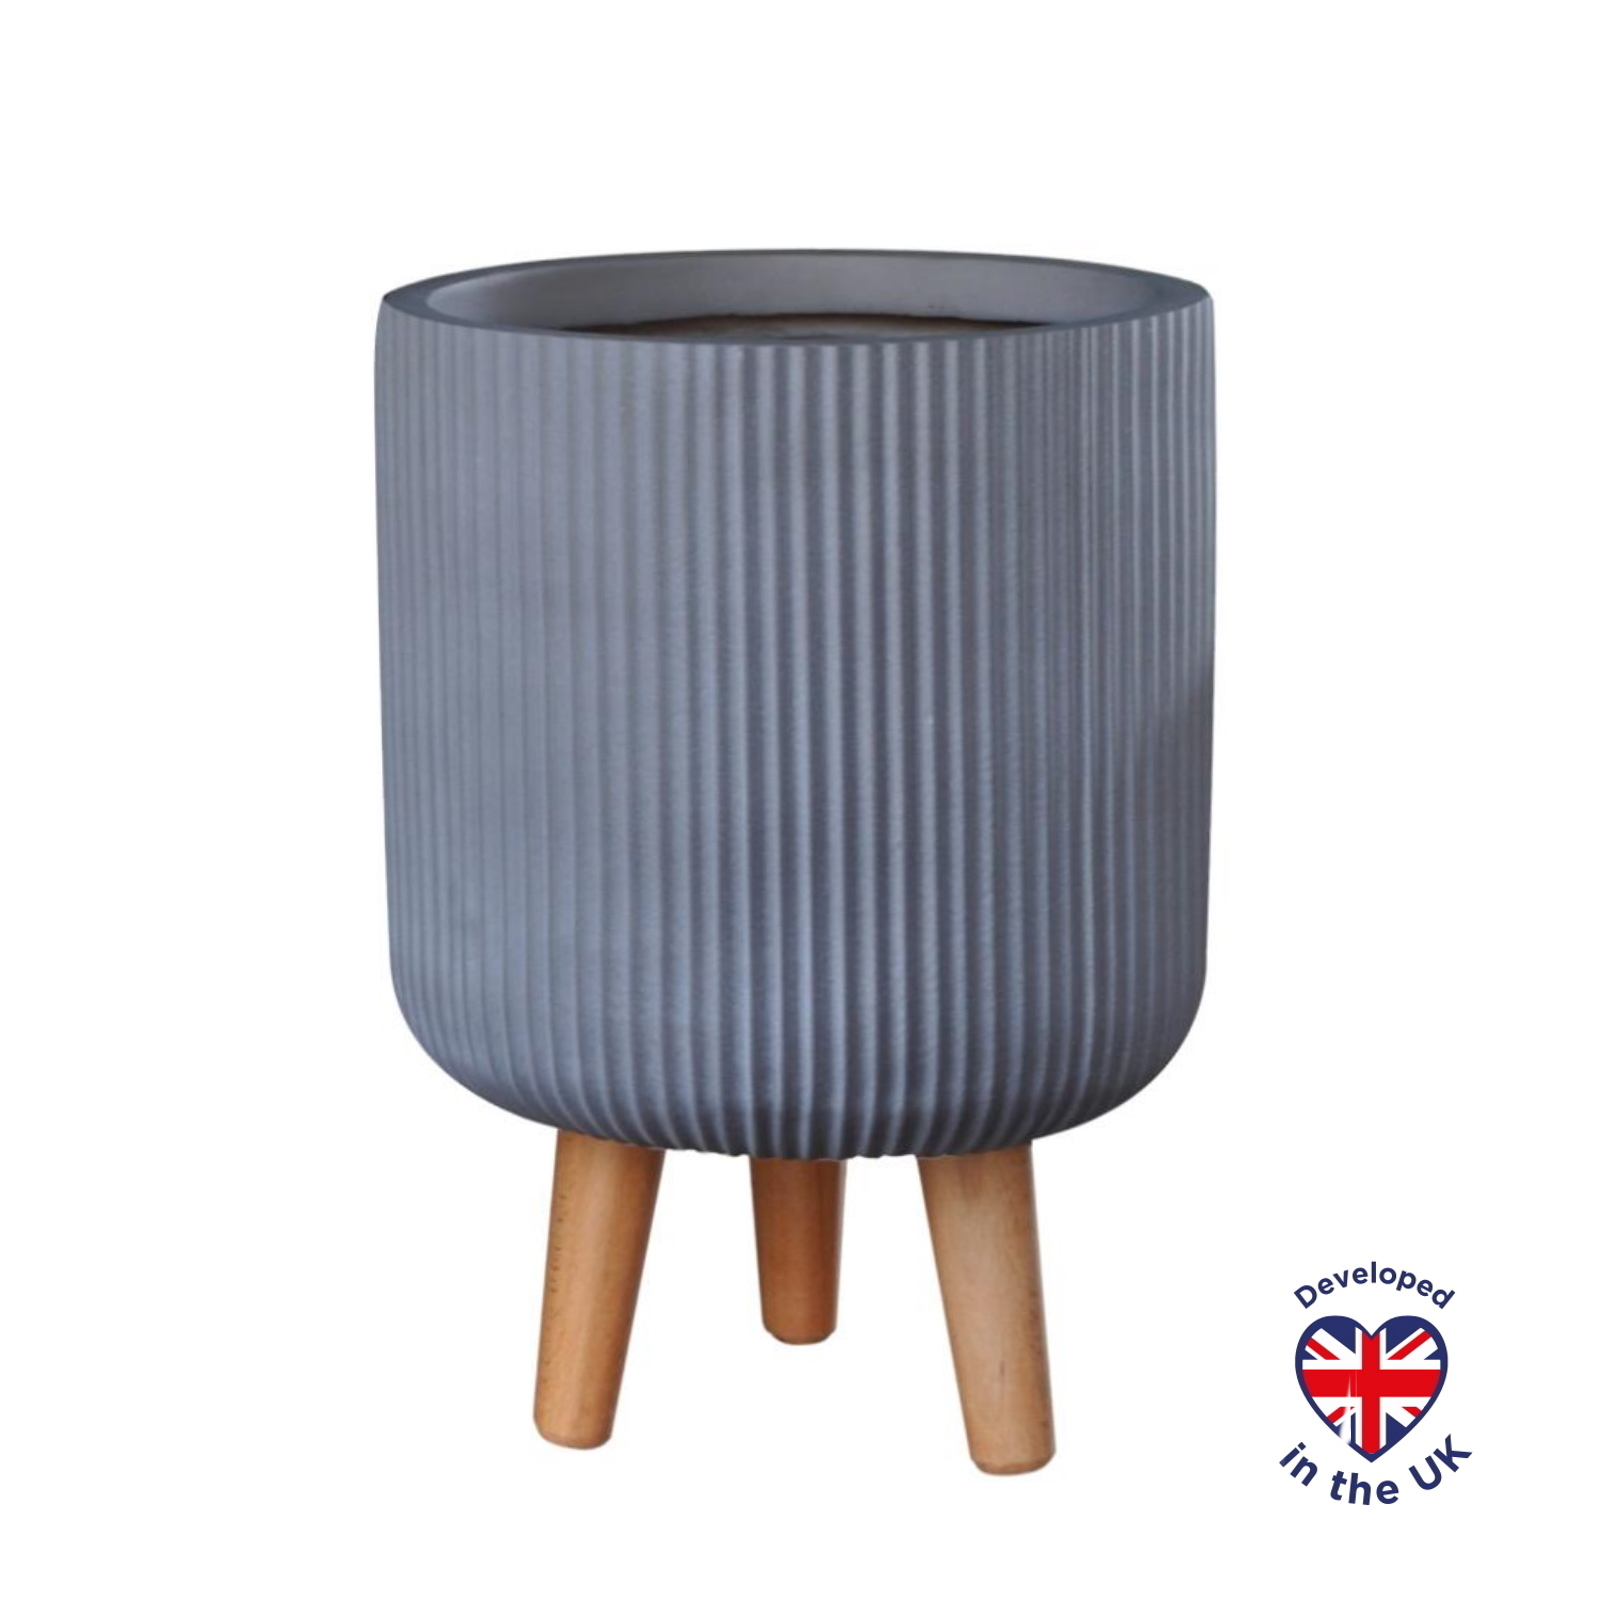 Ribbed Grey Cylinder Indoor Planter with Legs D25.5 H36 cm, 10.4 ltrs Cap.